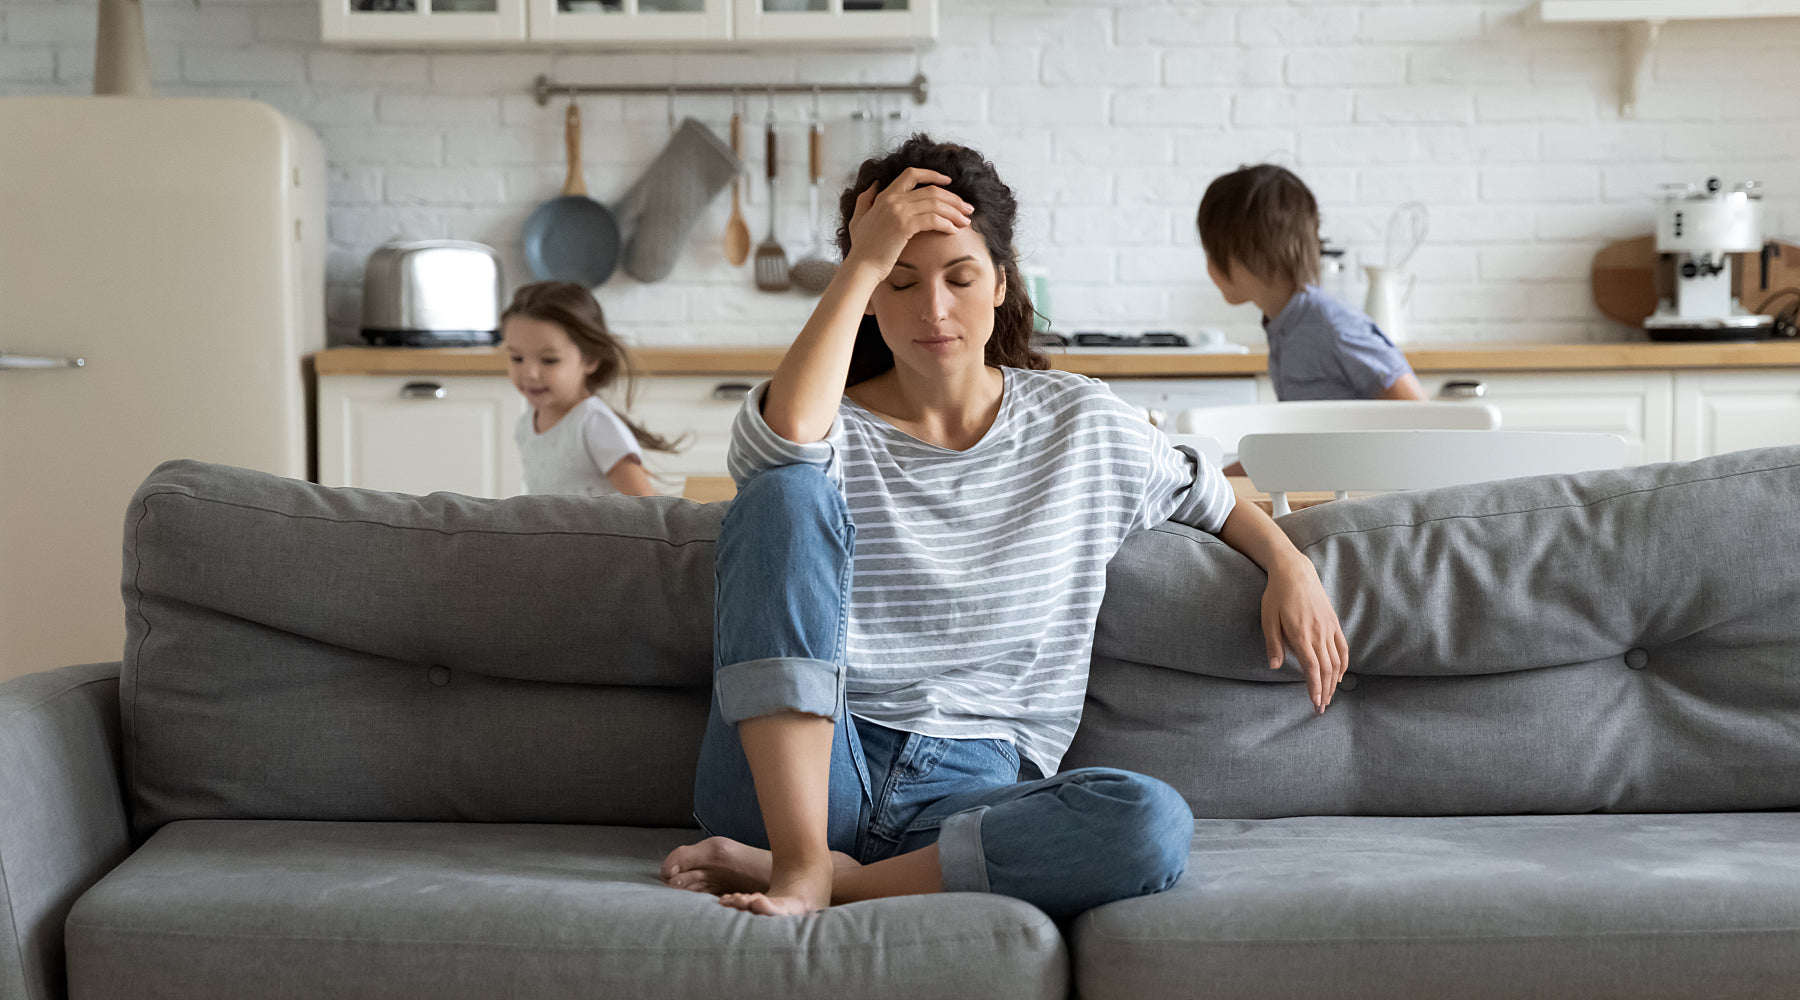 Young mother sitting on a couch looking stressed with two kids in the background.